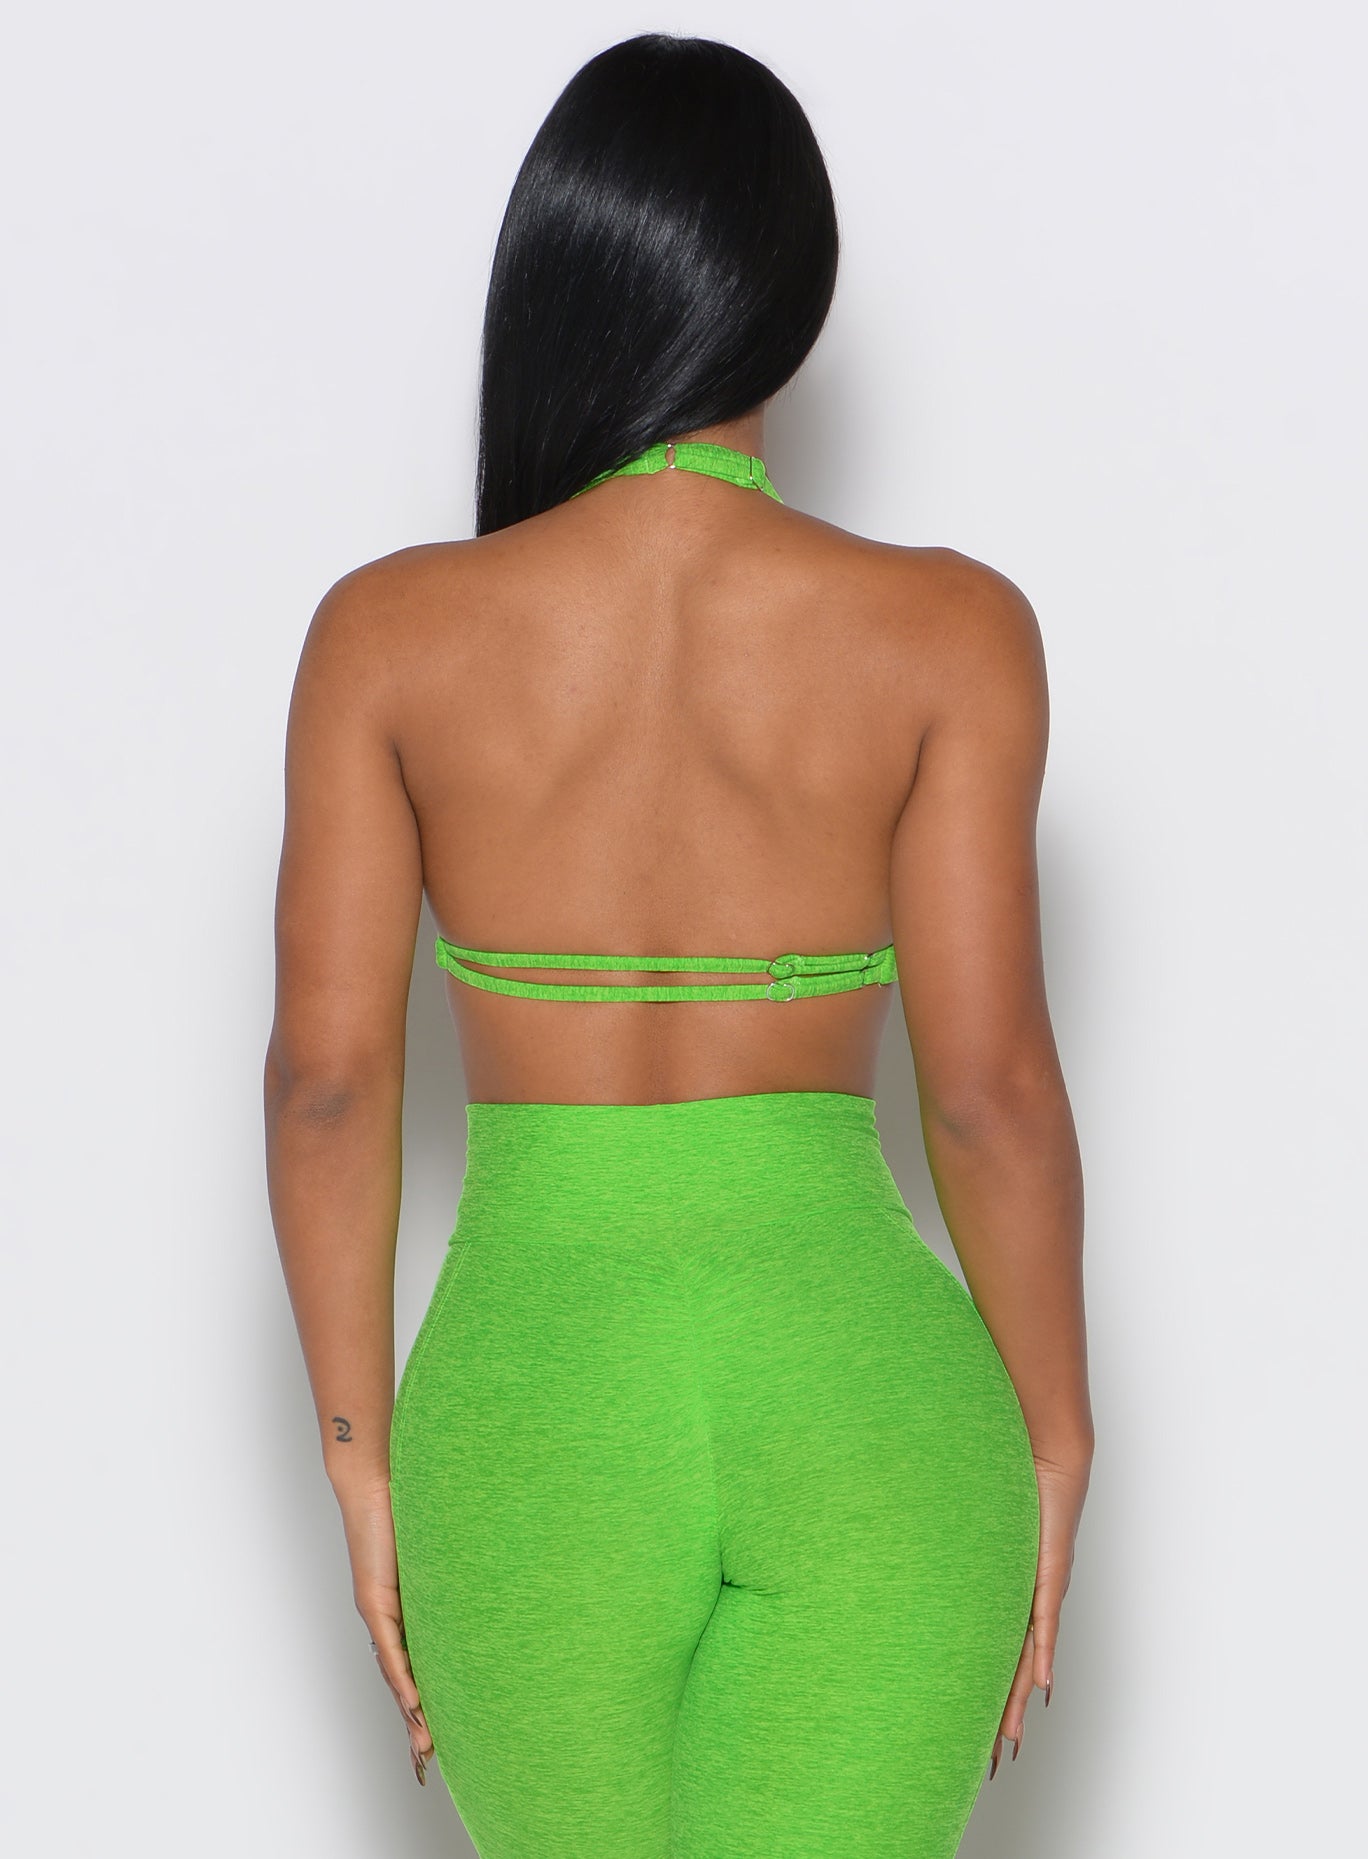 back profile view of a model wearing our butterfly sports bra in neon lime green color along with the matching leggings 